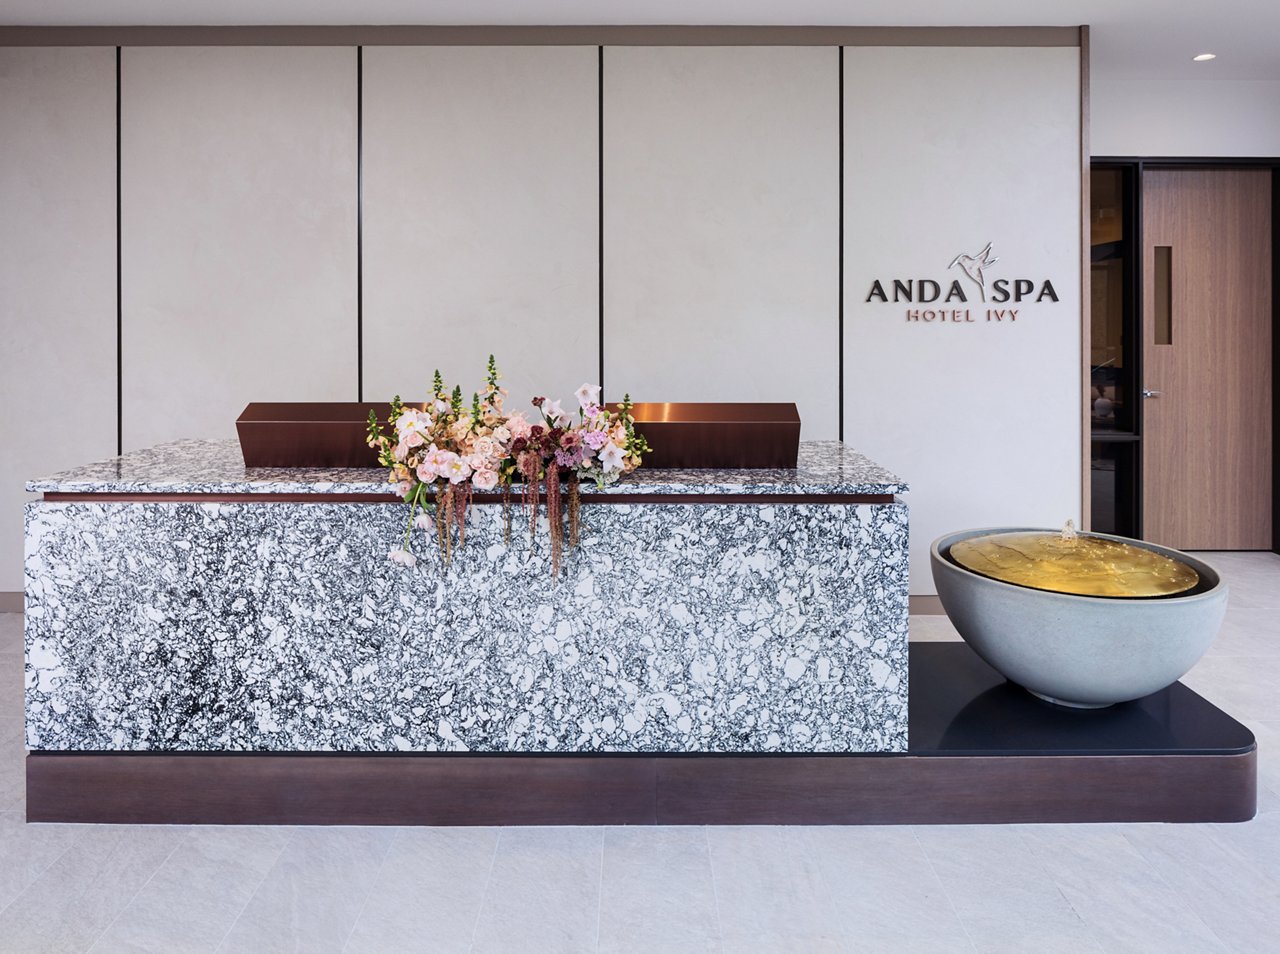 A stunning reception desk made from black and white quartz at the Anda Spa is Minneapolis, Minnesota